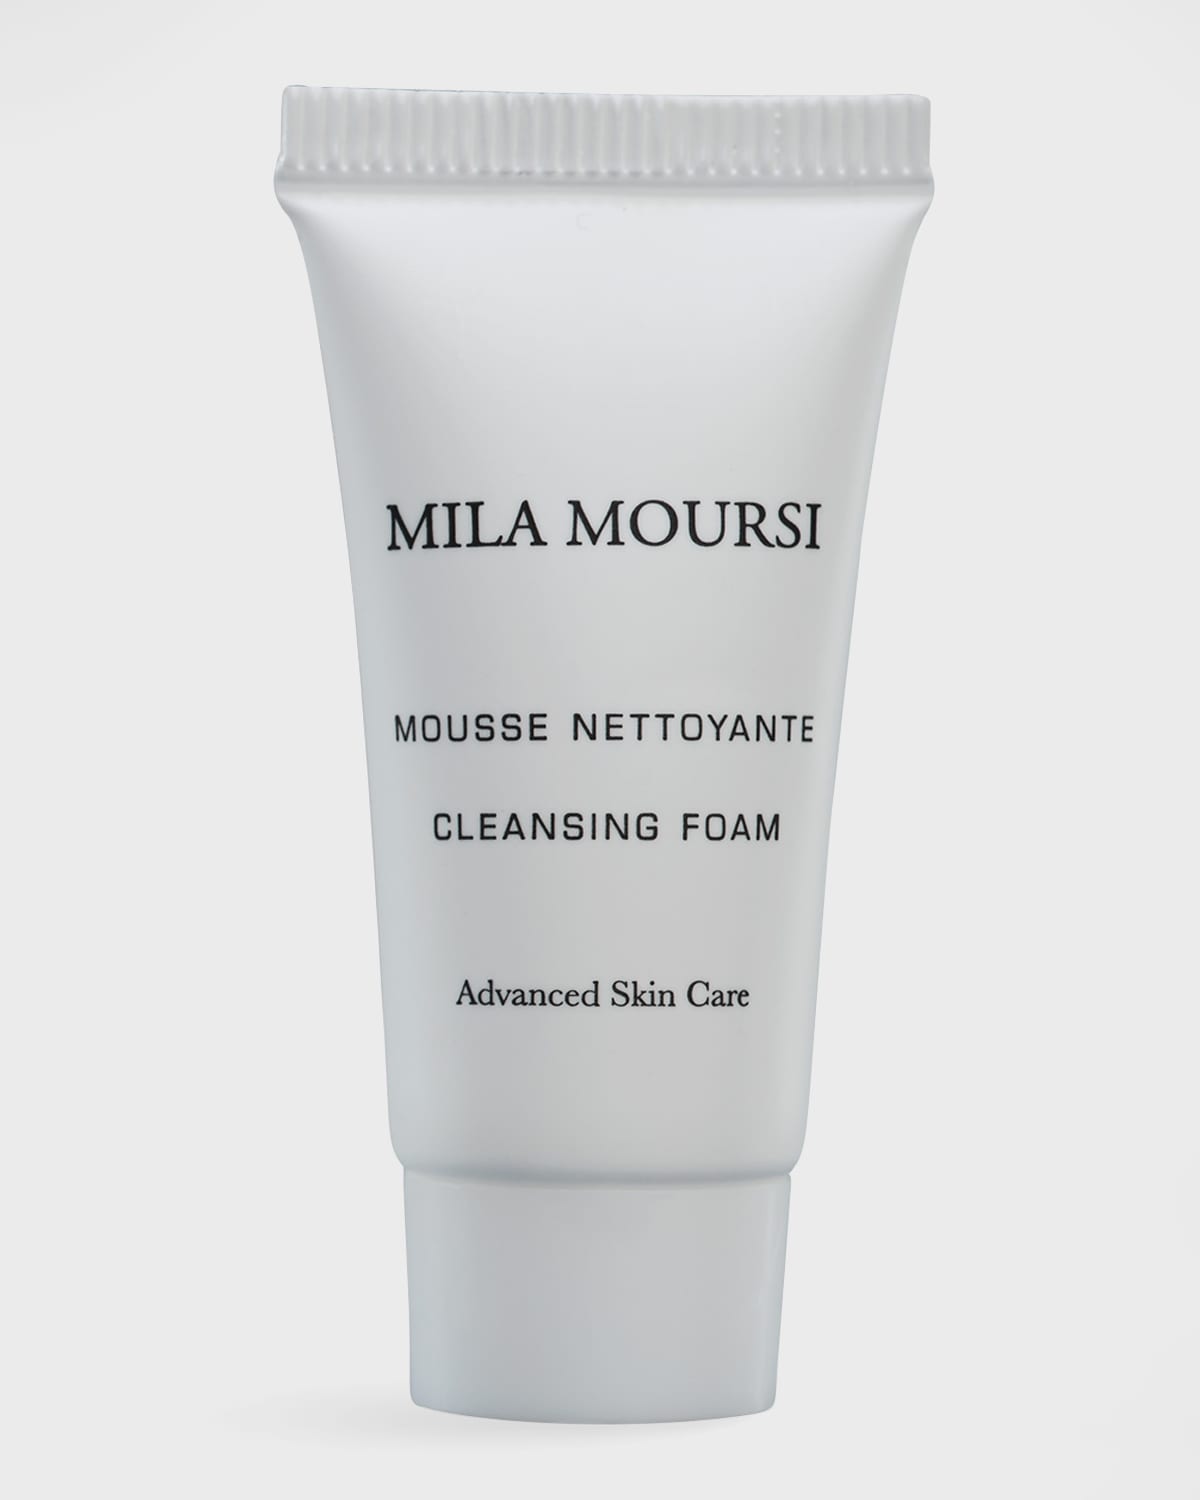 5 mL Cleansing Foam, Yours with any $75 Mila Moursi Purchase